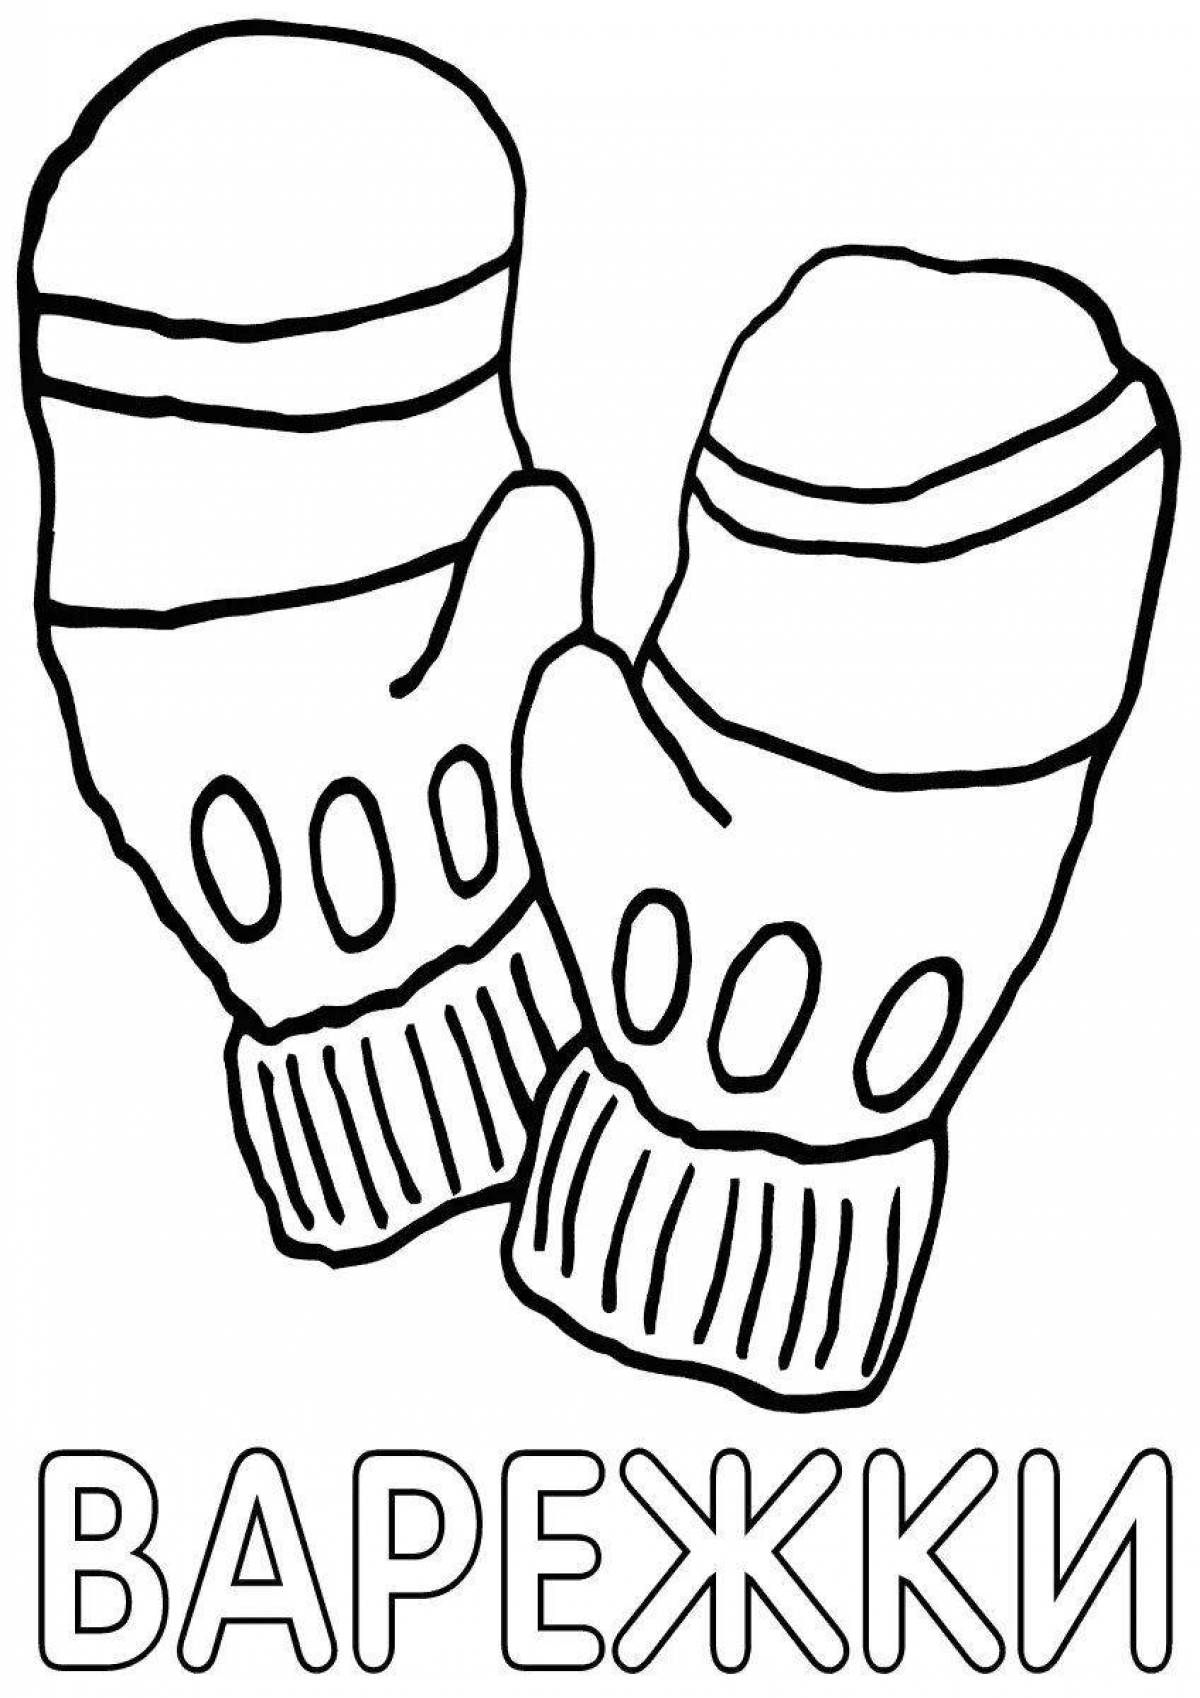 Amazing clothes and shoes coloring page